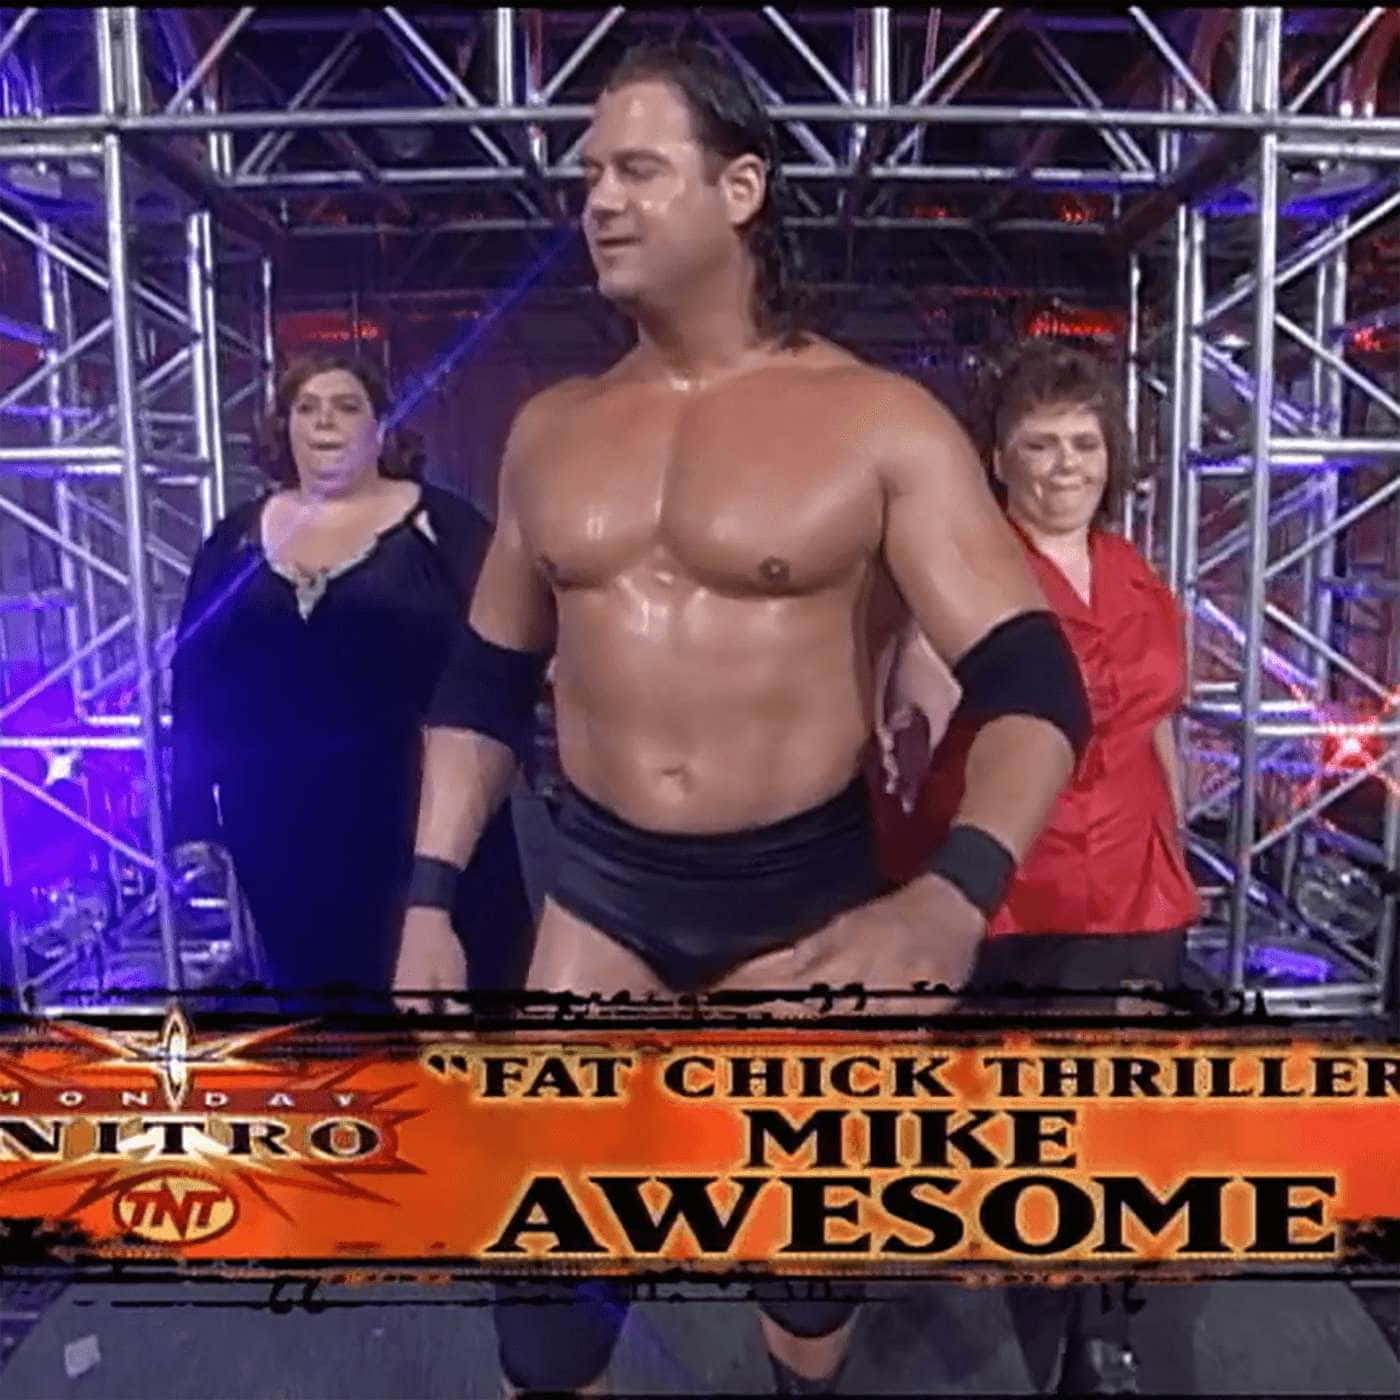 Fat Chick Thriller Aka Mike Awesome Wallpaper